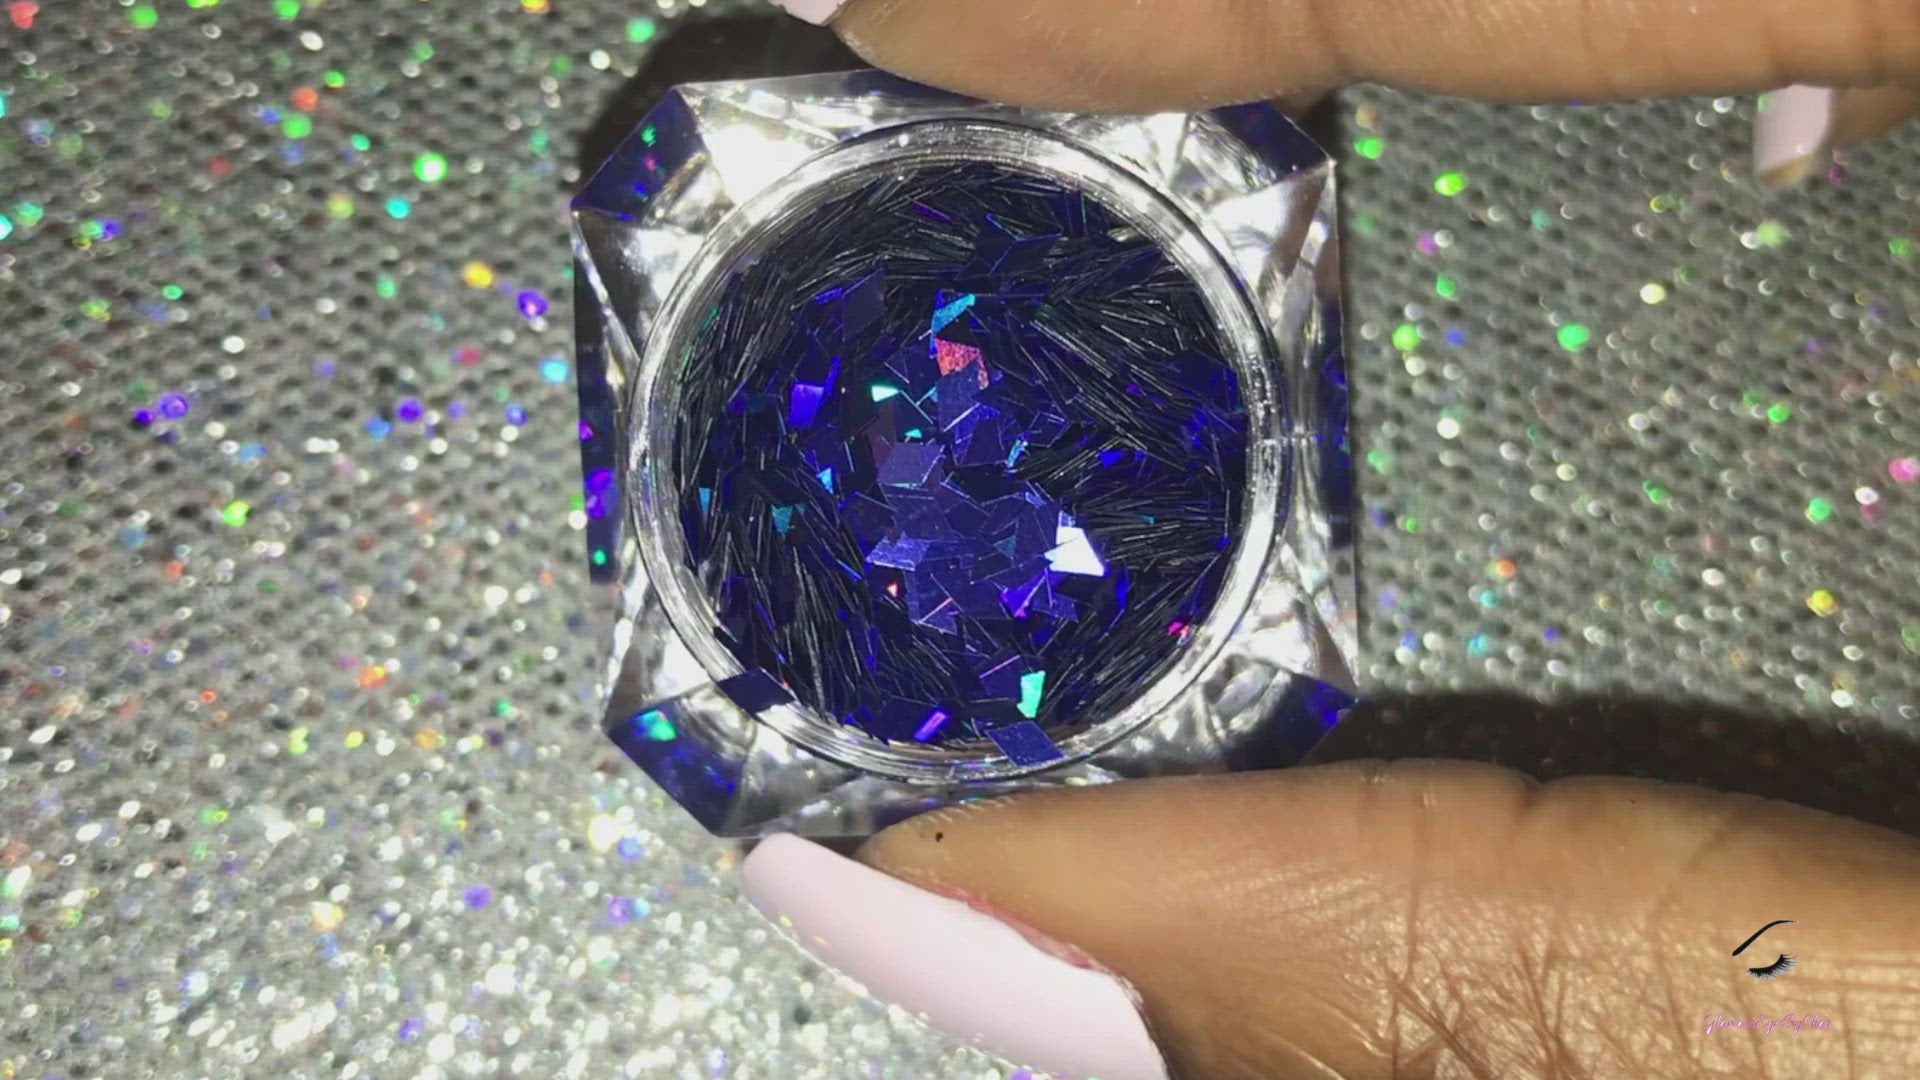 This glitter is called Royal Blue Diamonds and is part of the shaped glitters collection. It consists of royal blue diamond glitter with a holographic sparkle. Royal Blue Diamonds can be used for your face, body, hair and nails.